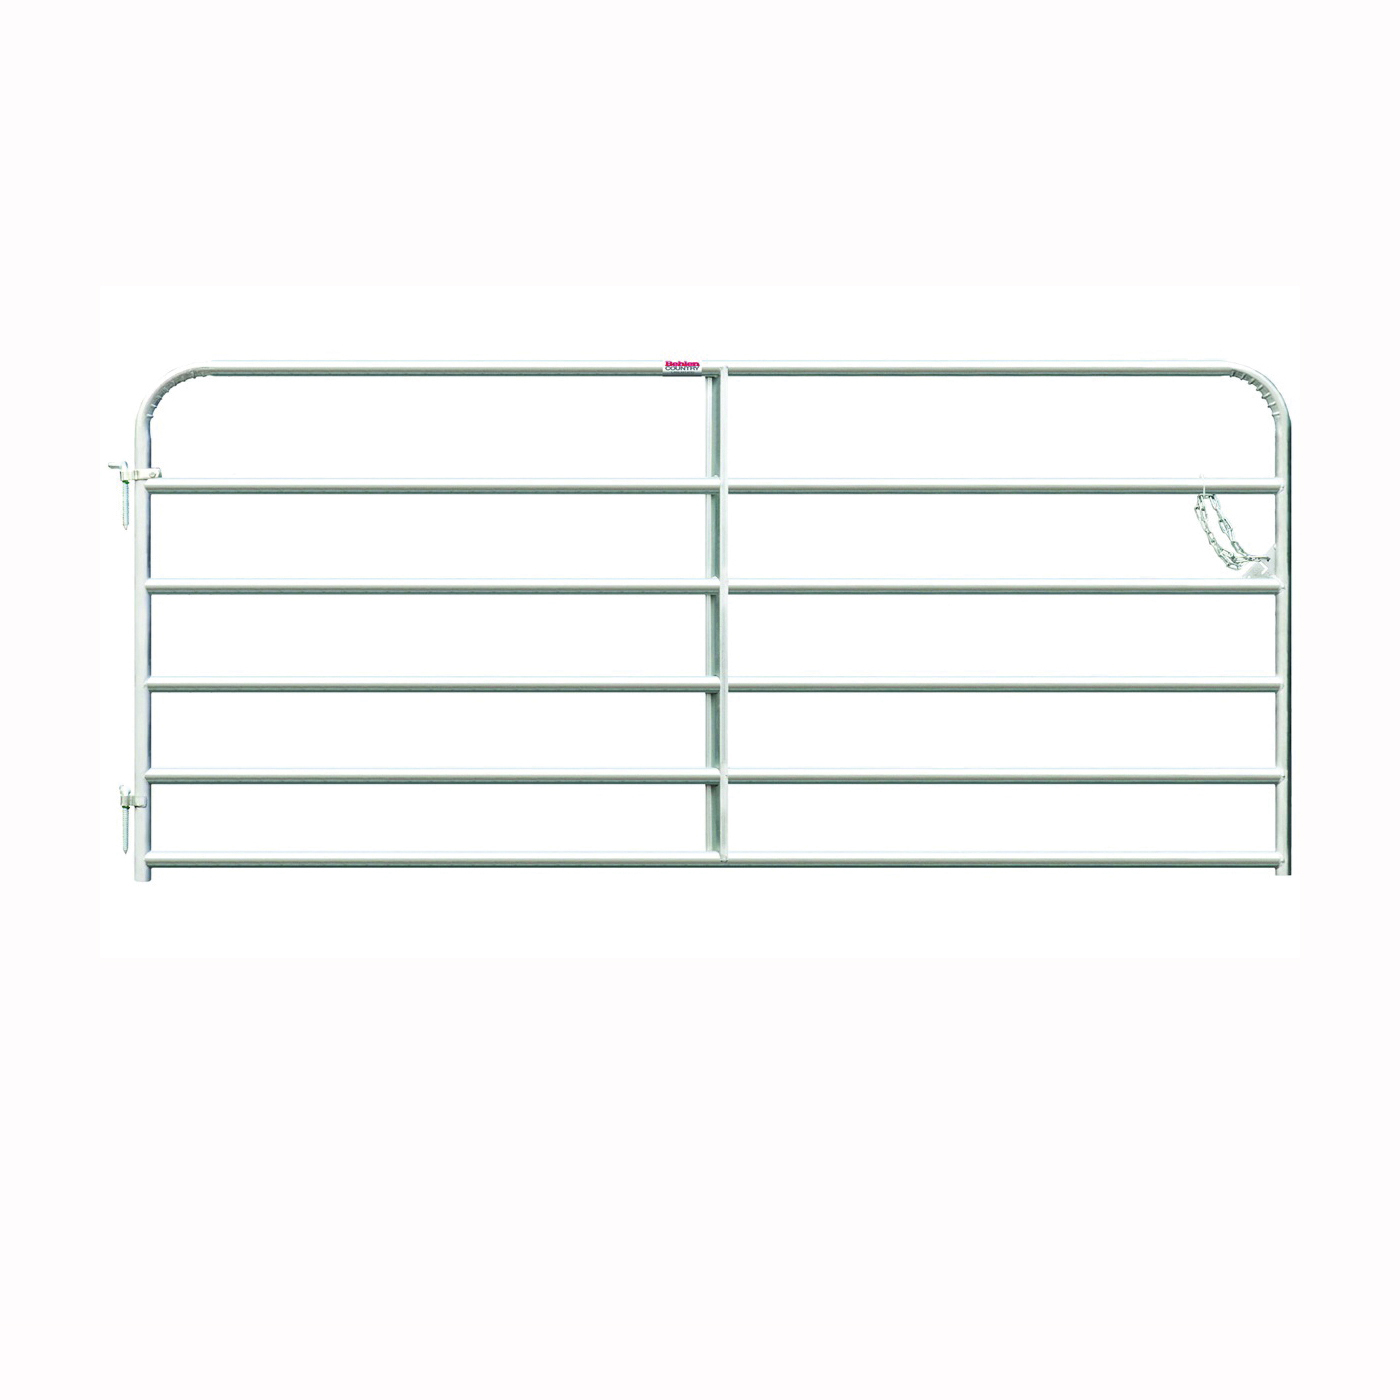 Behlen Country 40113088 Gate, 96 in W Gate, 50 in H Gate, 20 ga Frame Tube/Channel, Steel Frame, Galvanized